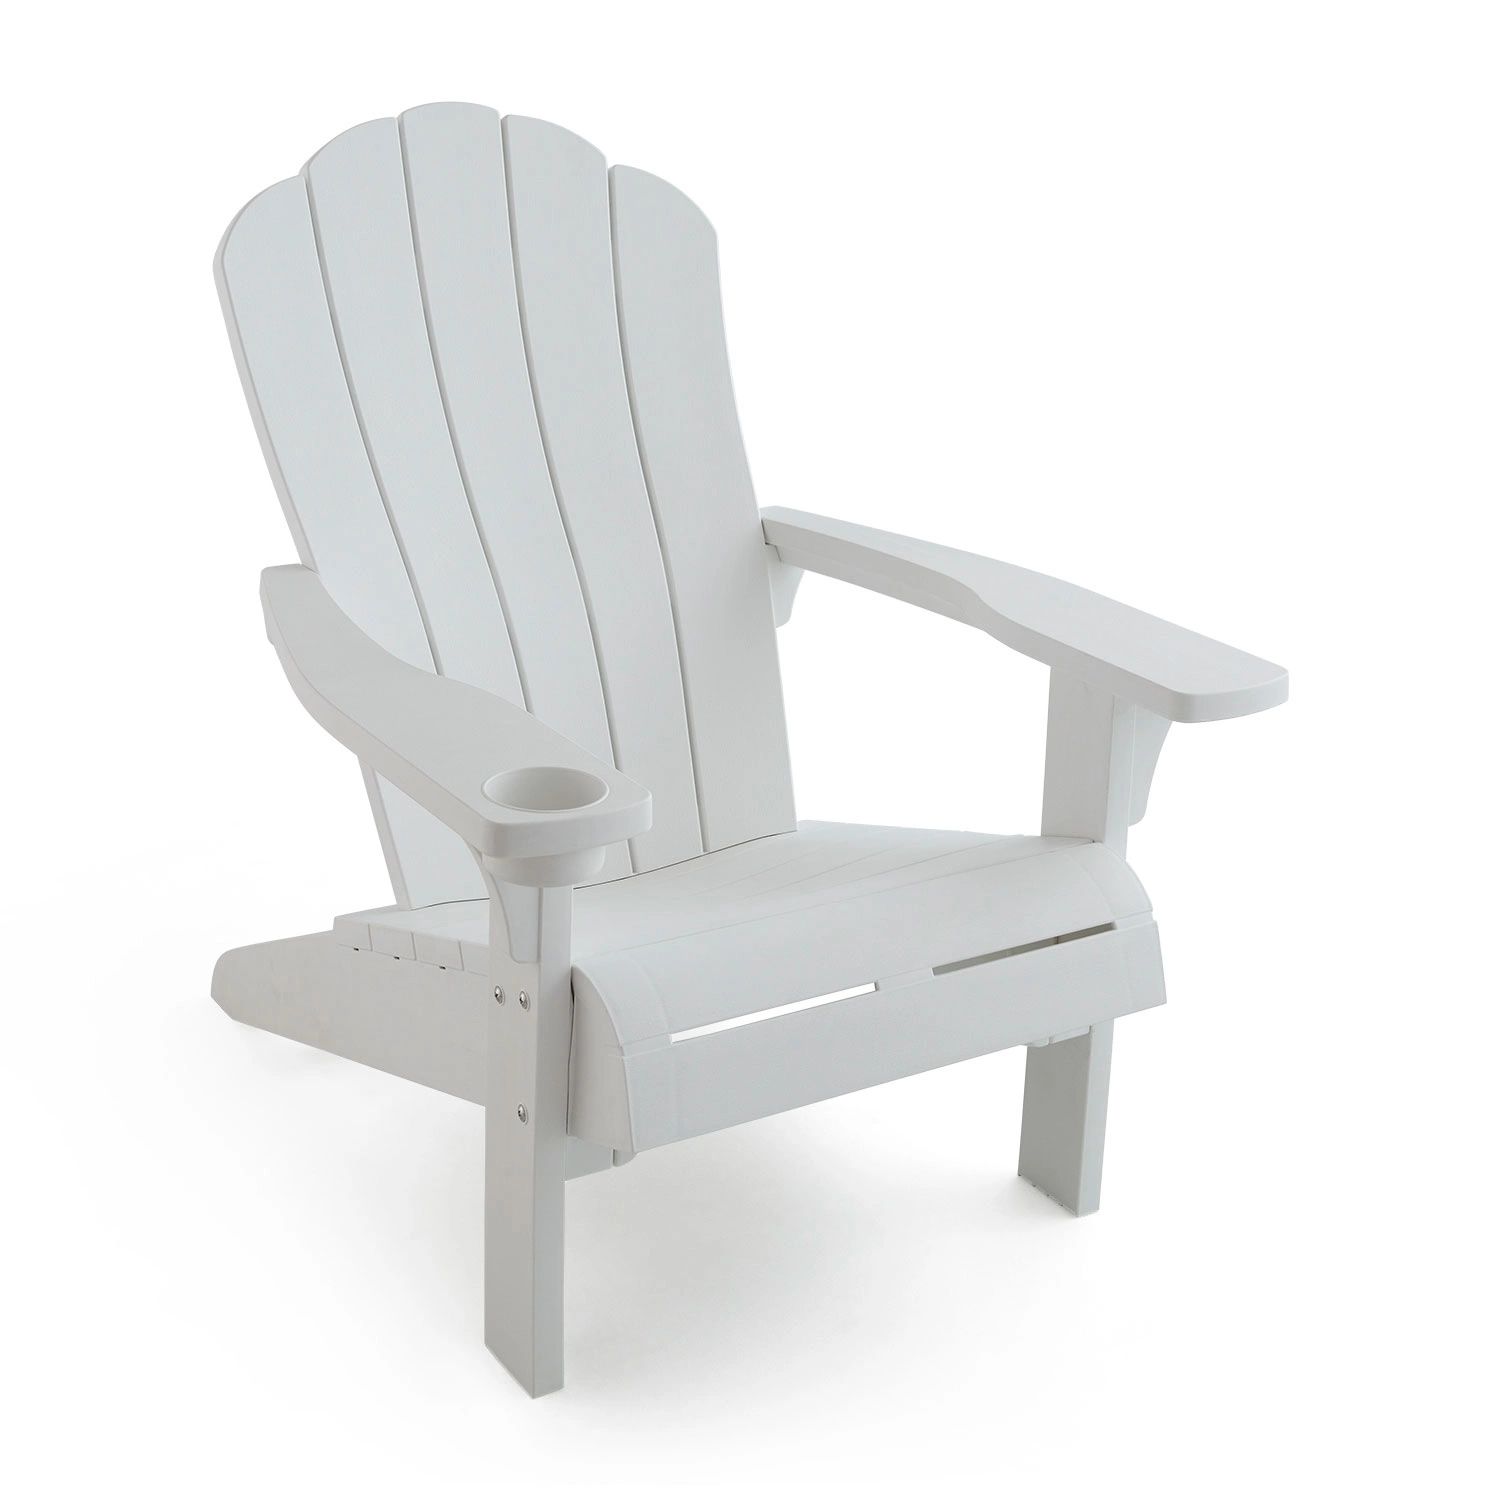 Keter Everest Adirondack Chair with Integrated Cupholder (Assorted Colors) | Sam's Club